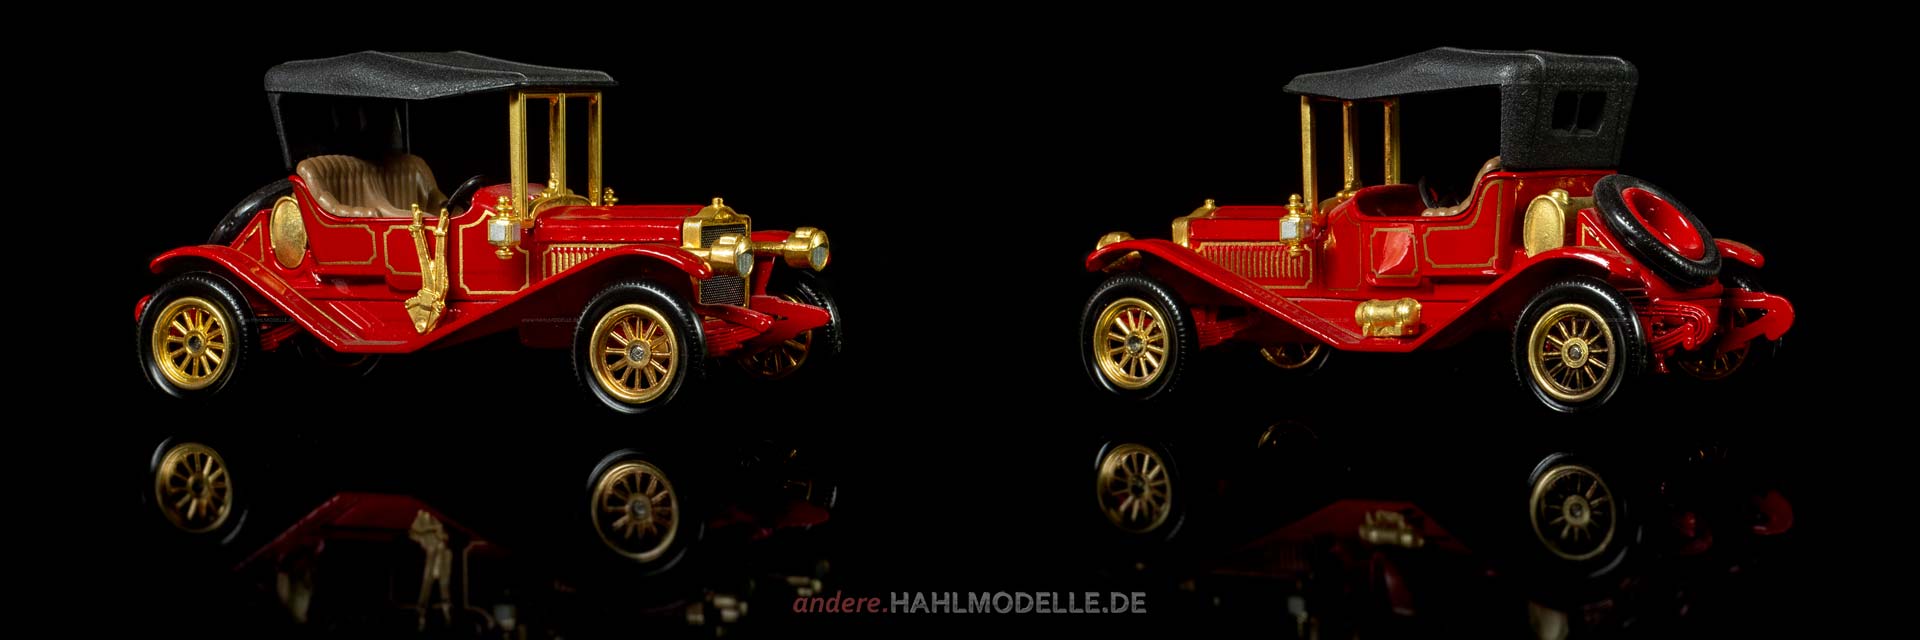 Maxwell Roadster | Roadster | Lesney Products & Co. Ltd., Matchbox – Models of Yesteryear | 1:43 | www.andere.hahlmodelle.de